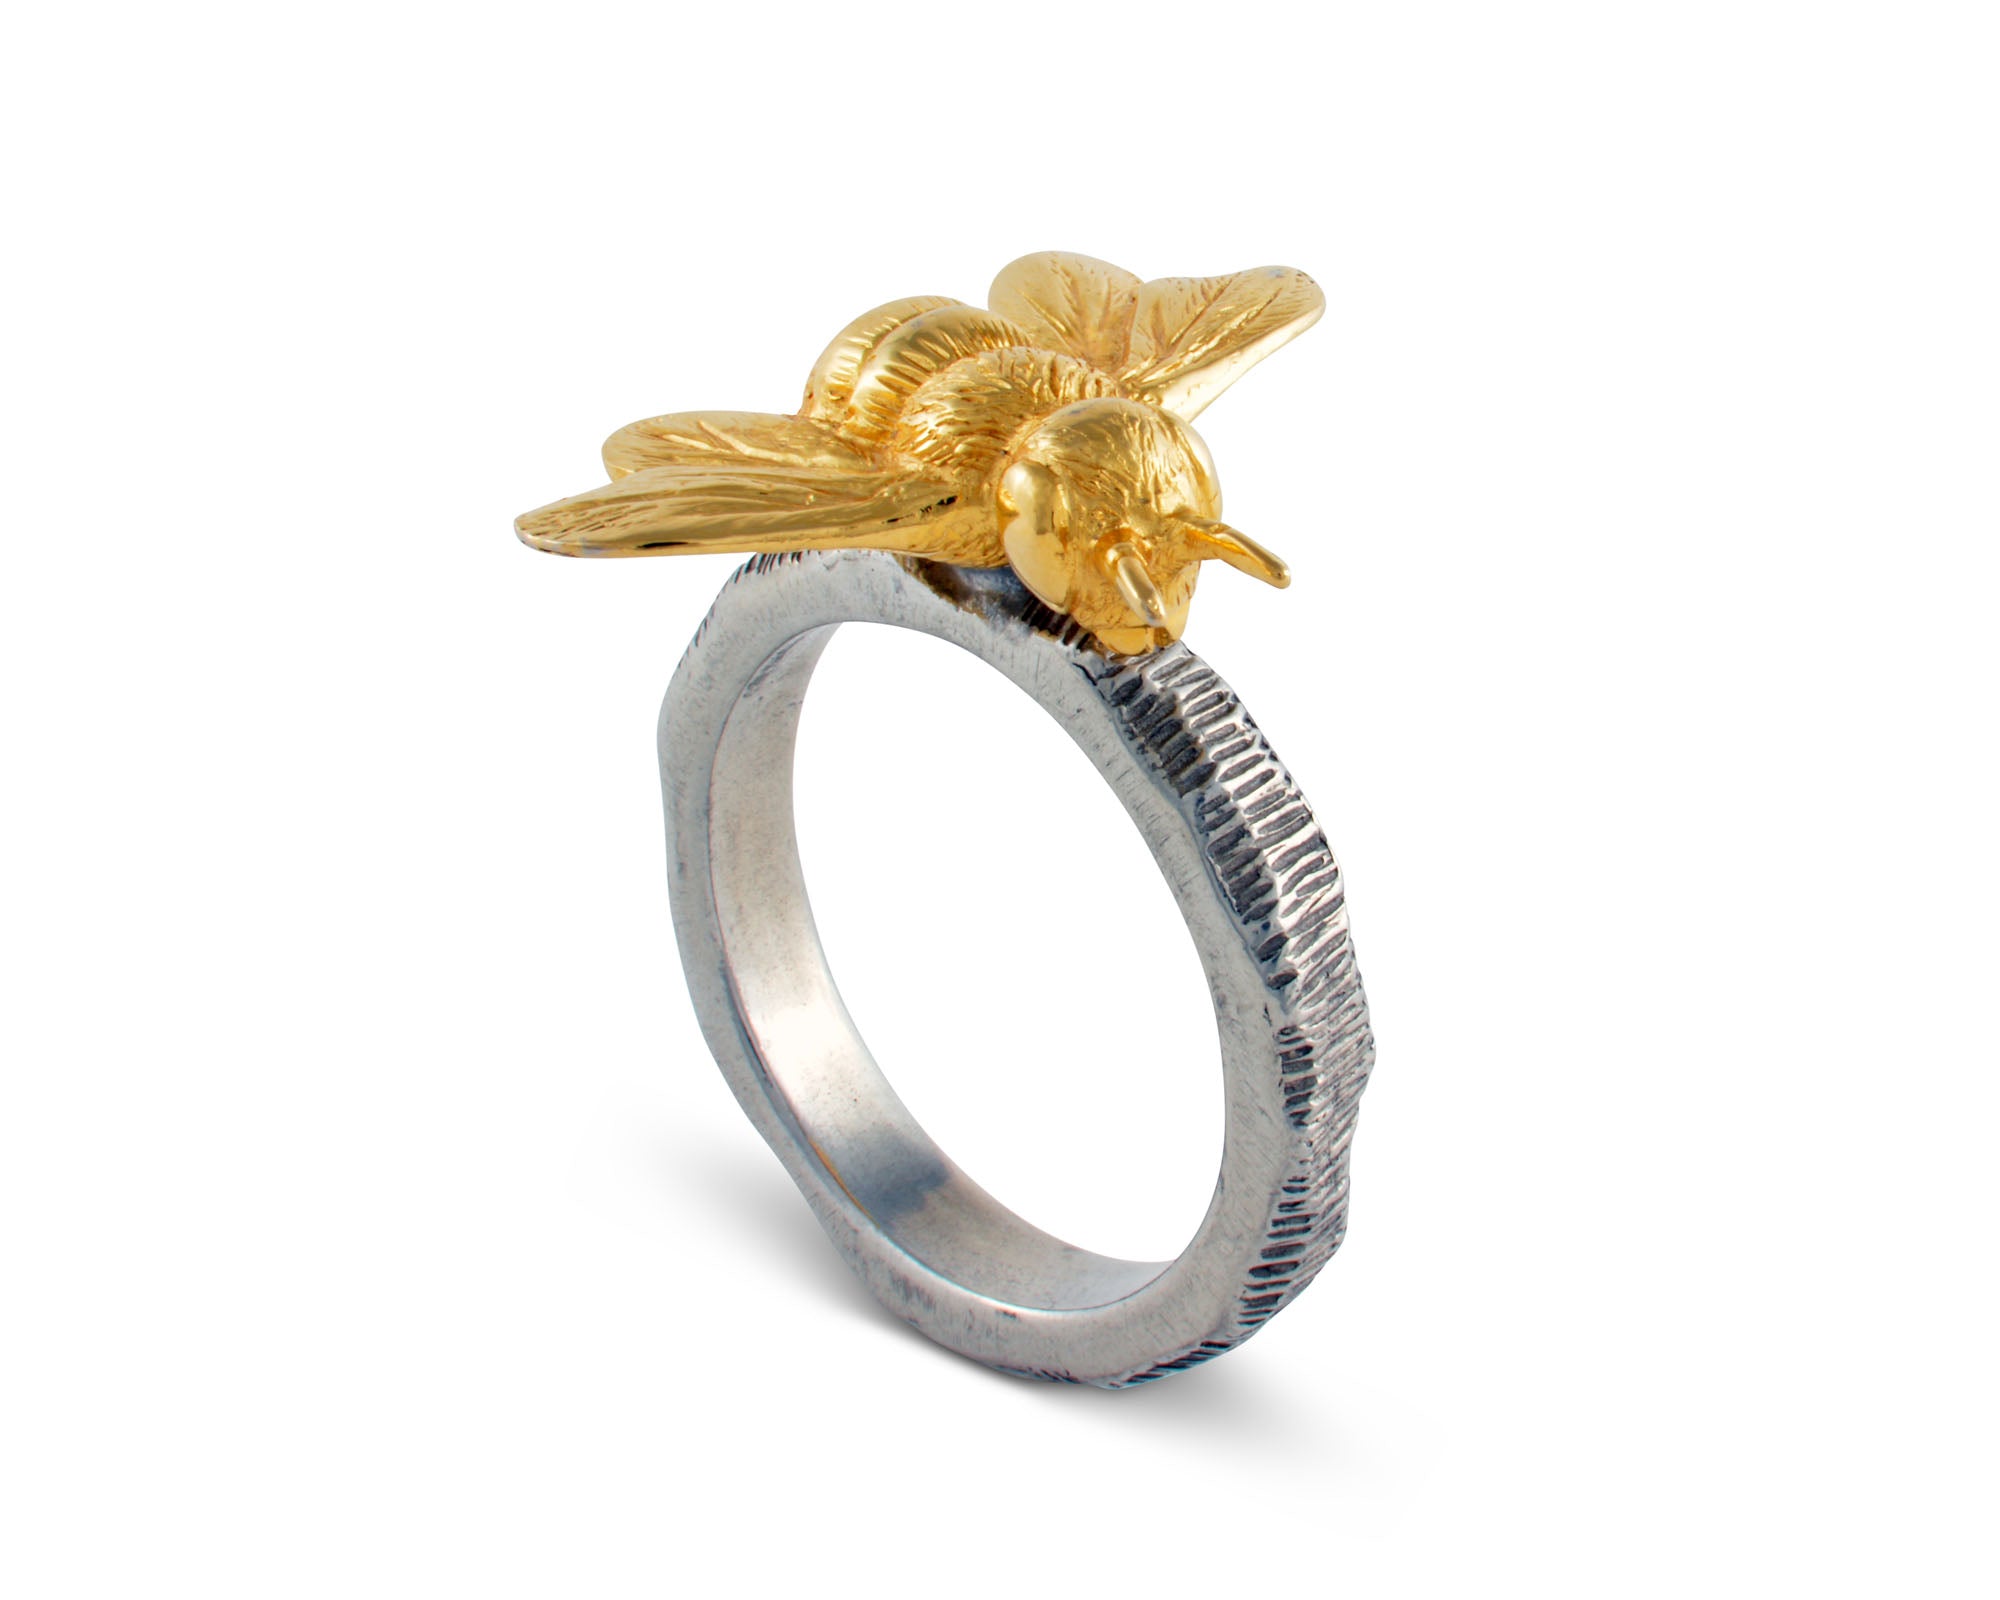 Vagabond House Gold Bee Napkin Ring Product Image